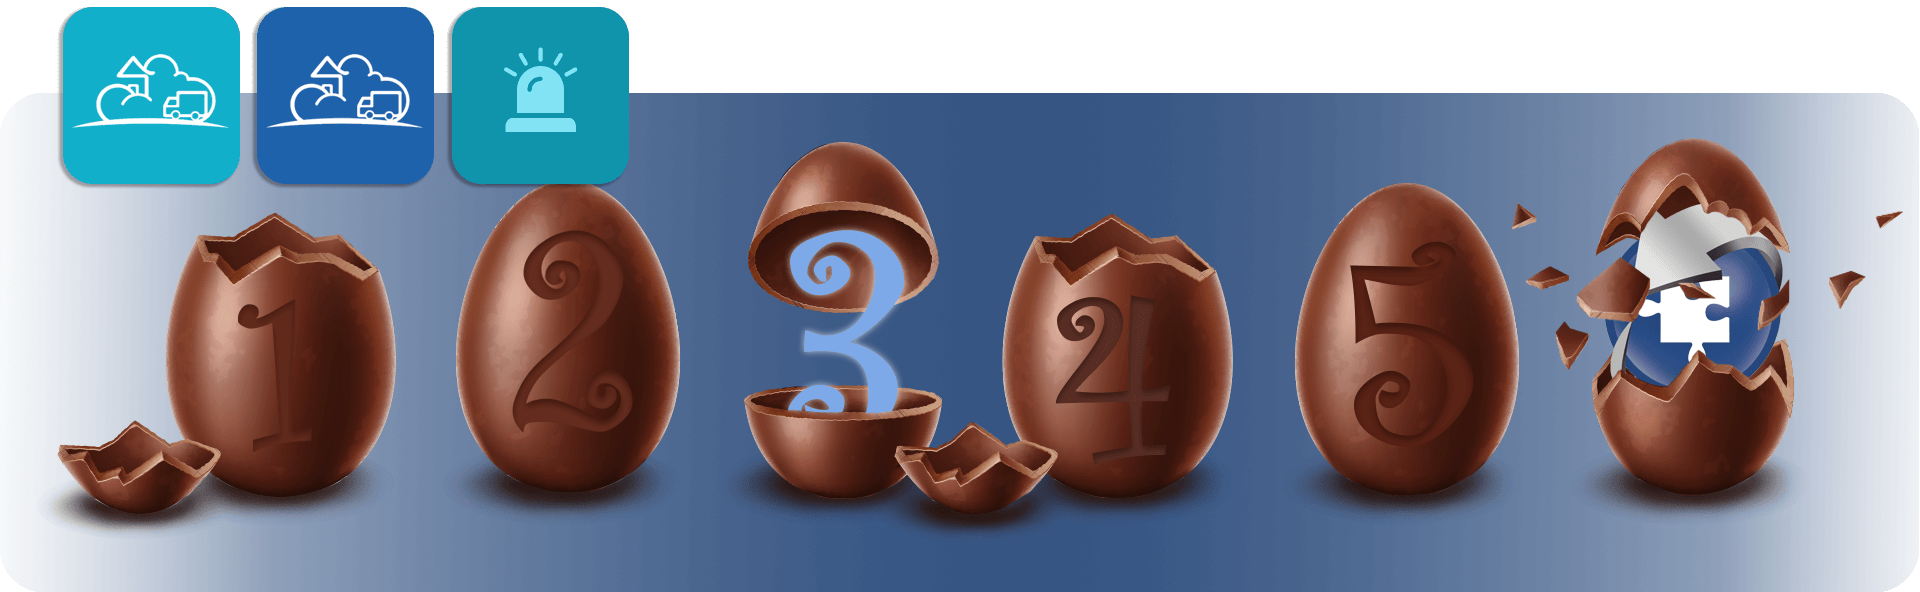 chocolate easter egg countdown from 1-5